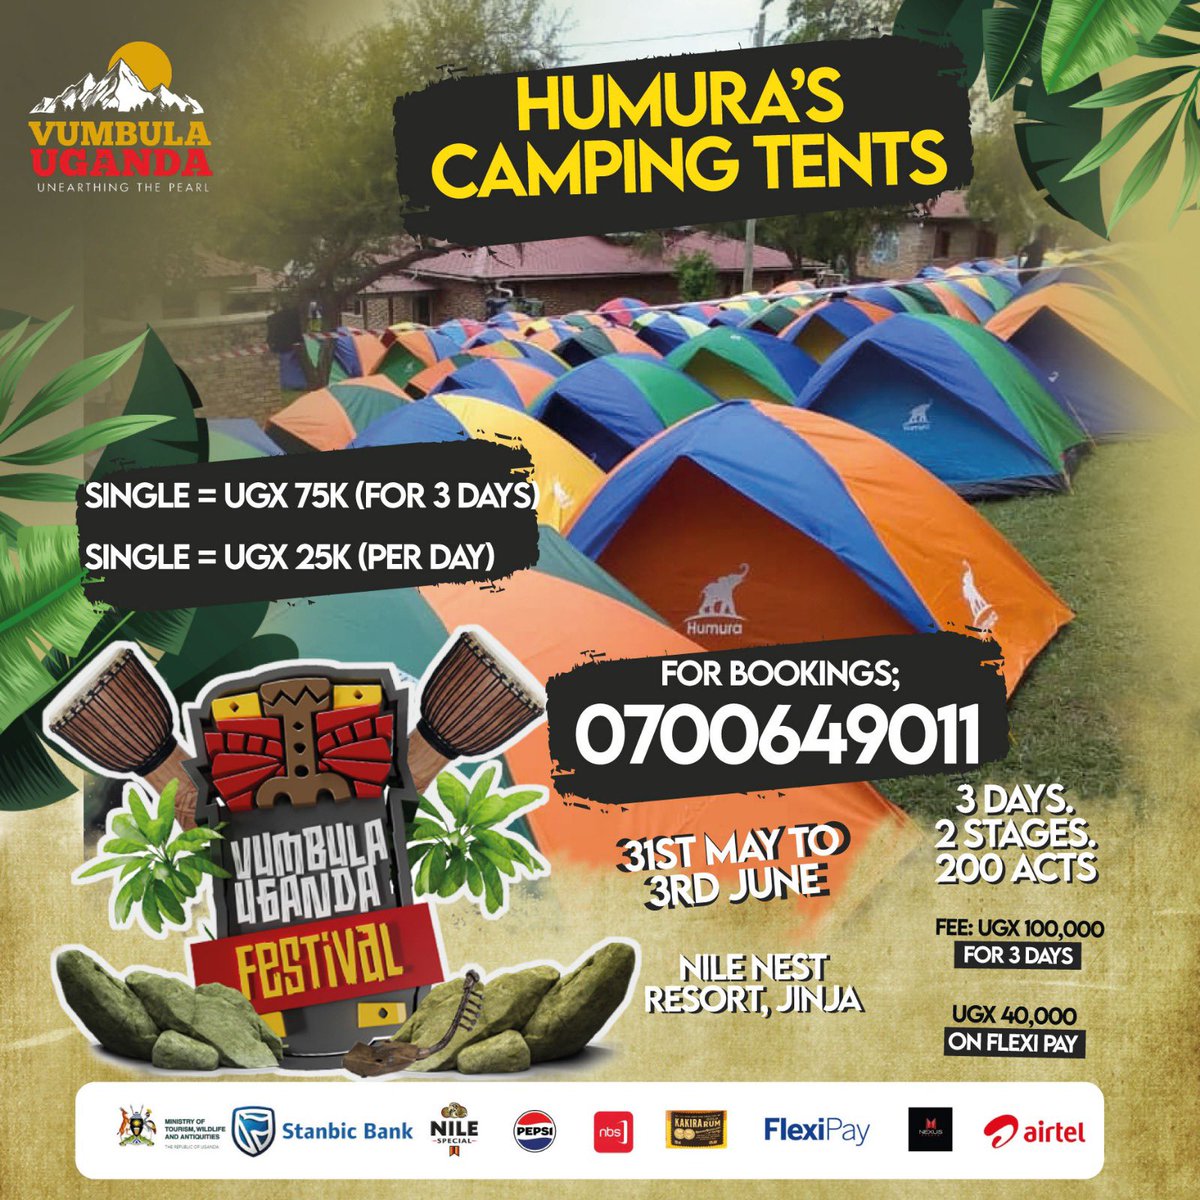 After partying all night, you definitely need to rest. The #VumbulaUgandaFestival offers budget-friendly tent accommodations for all the days of the event. For bookings, call: 0700649011 Courtesy of @HumuraTourism